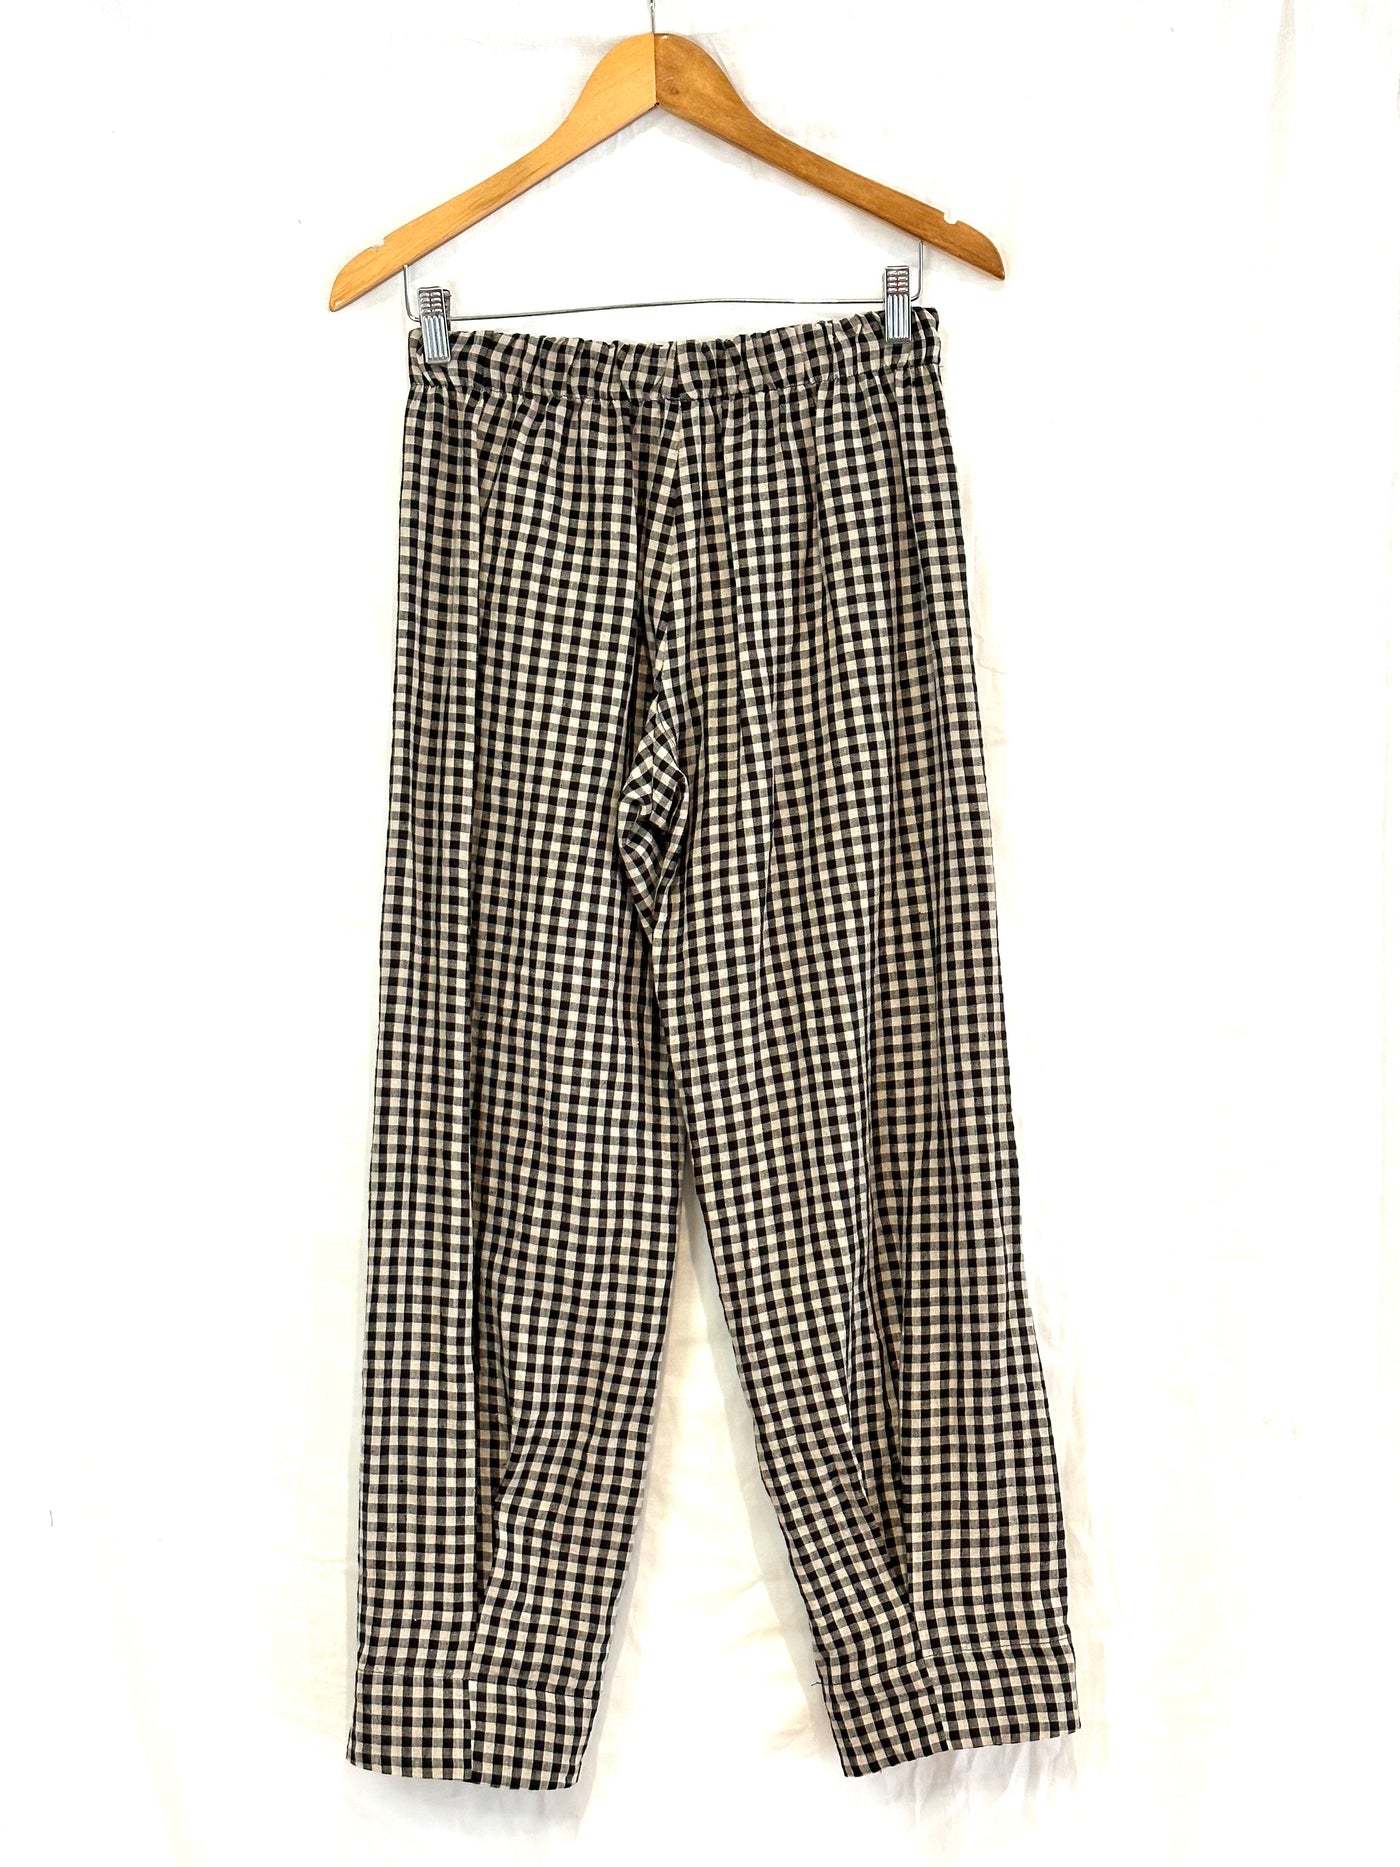 Vale and Ward - Ainsley Pant. Check